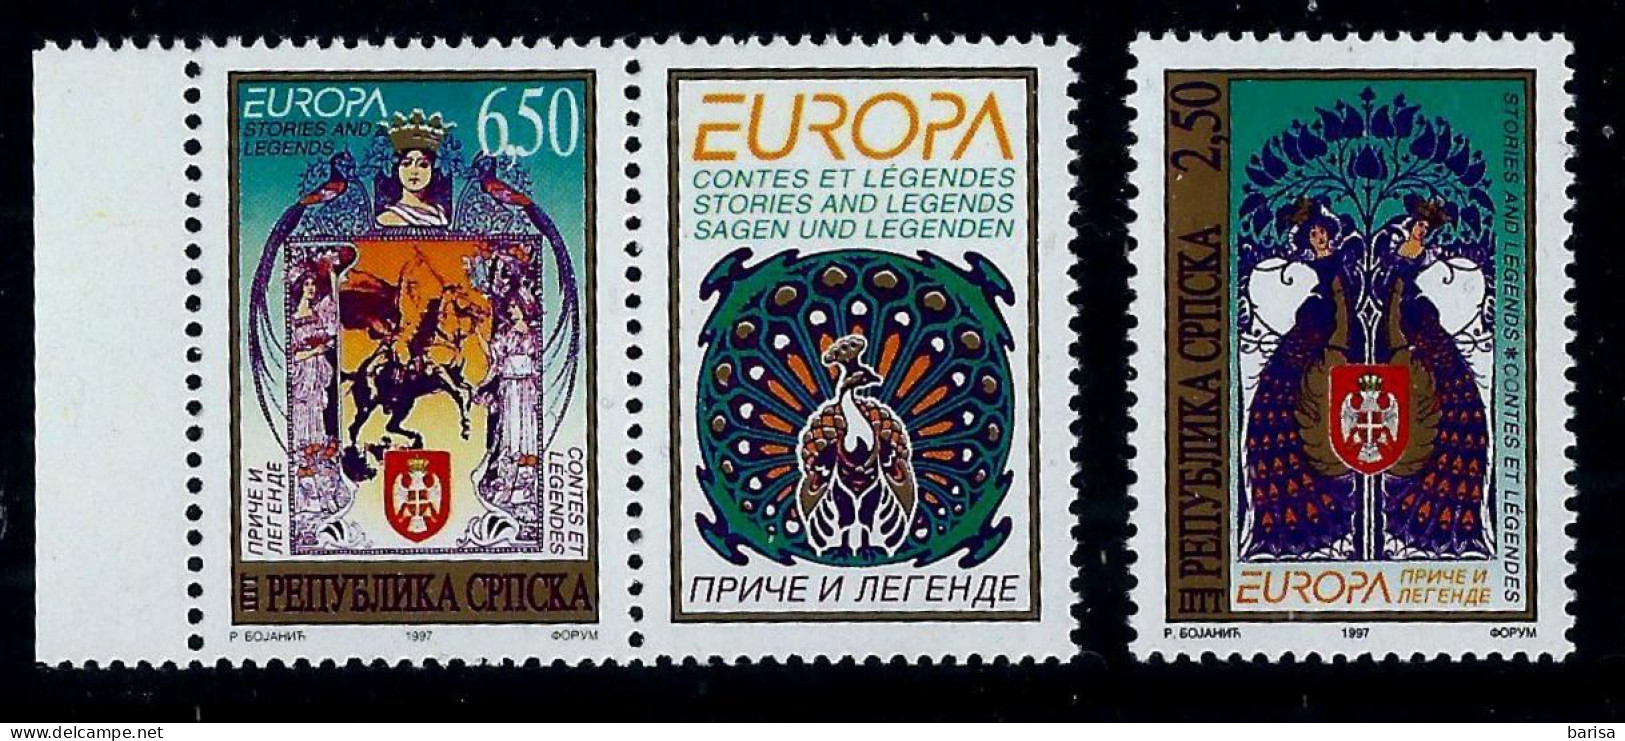 Bosnia And Herzegovina (Serb.Adm.) 1997: EUROPA - Sages And Legends;  With Vignette ** MNH - 1997